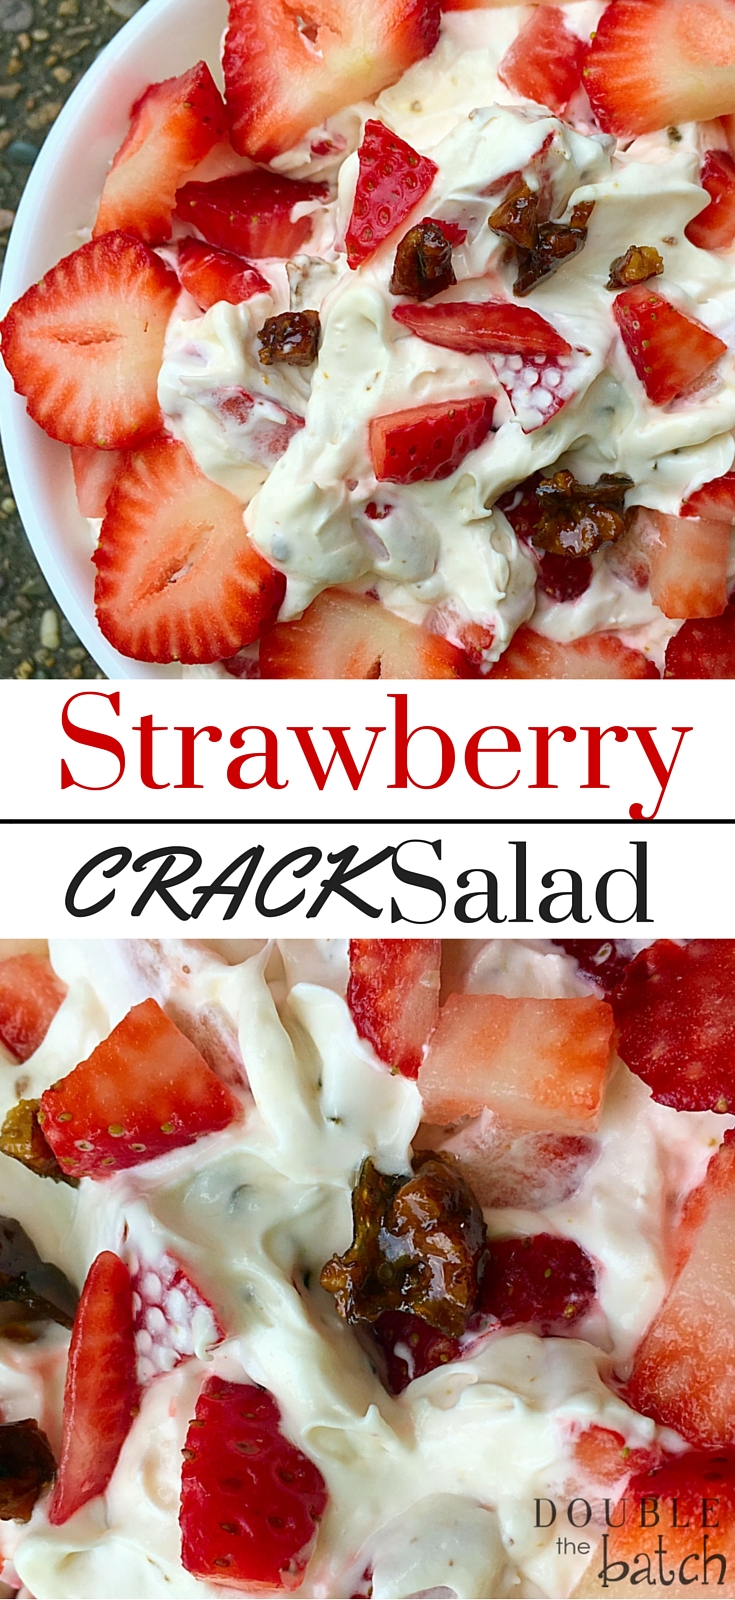 This is absolutely the BEST potluck dessert salad I have everh had! IF you love strawberries, then this strawberriy dessert salad with toffee will make your tastebuds sing!